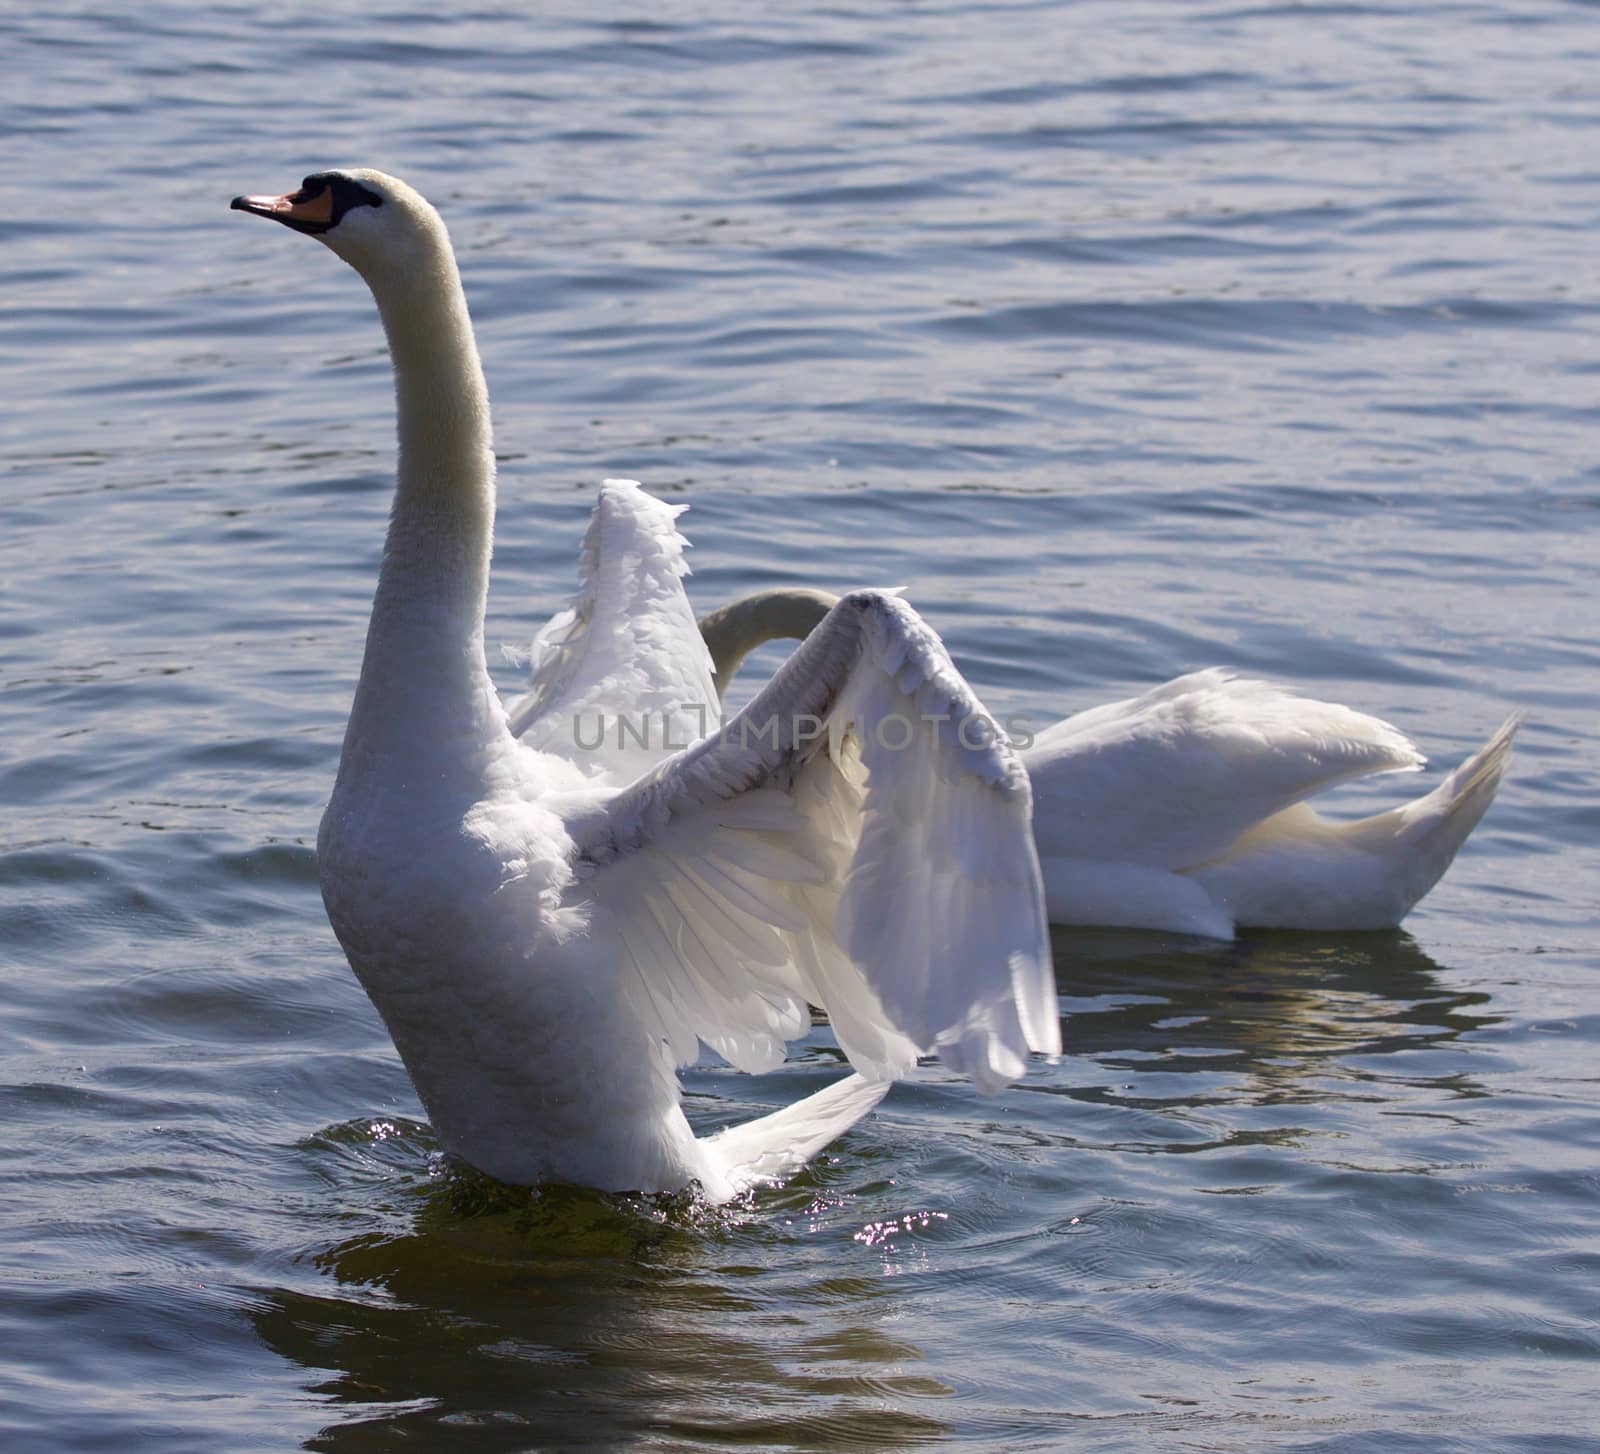 Beautiful photo of the swan with the opened wings in the lake by teo